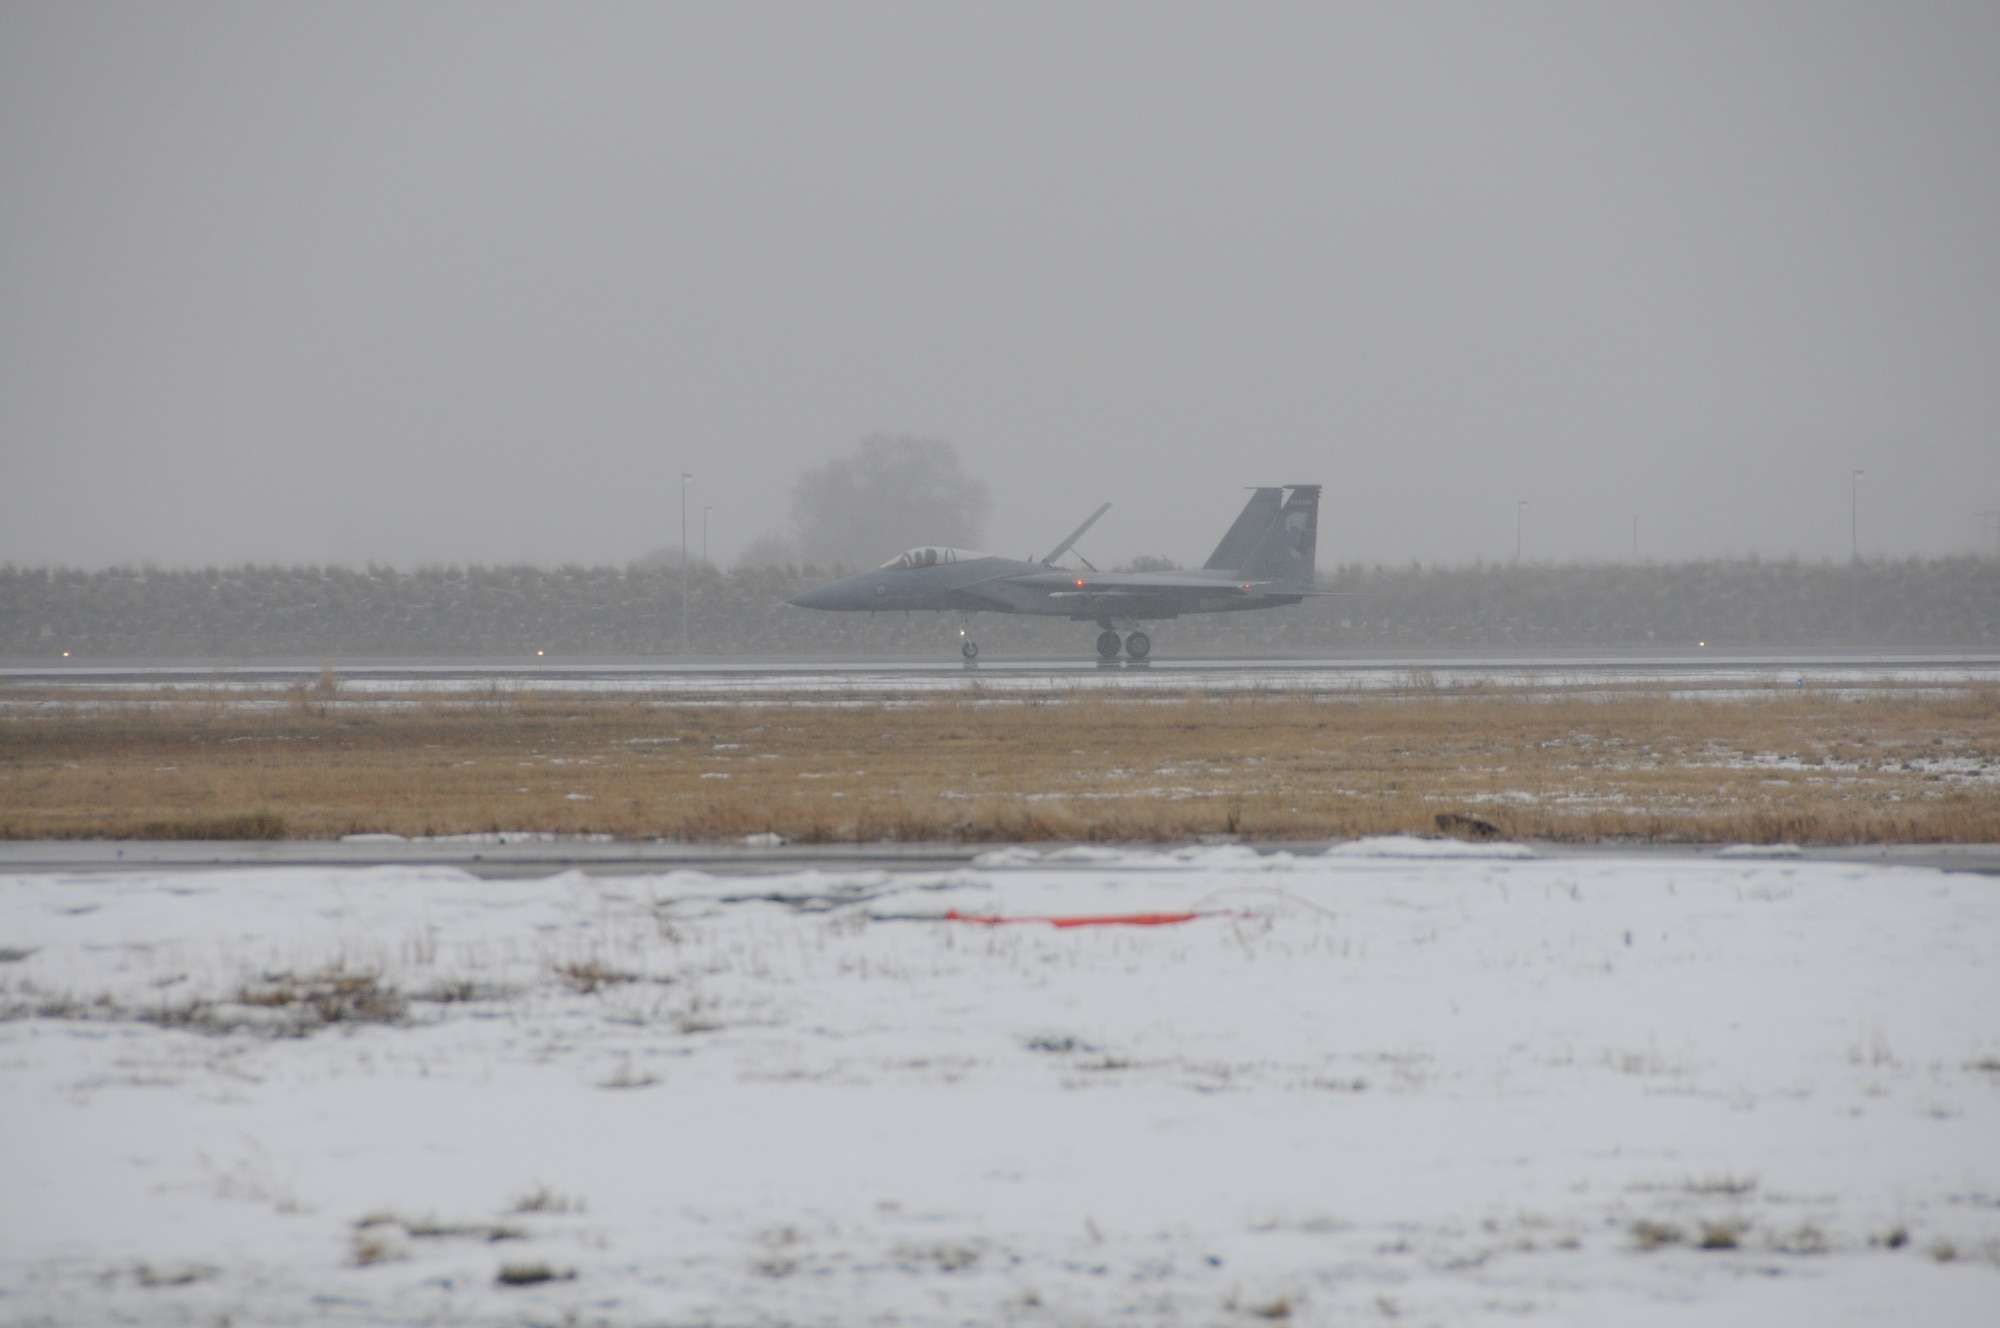 An Ore. Air National Guard F-15 Eagle from the 173rd Fighter Wing lands on the snowy runway at Kingsley Field, Klamath Falls, Ore. February 2, 2010. The completion of this routine training mission marked 100,000 hours flown by the 114th Squadron since its inception in 1983, a truly significant milestone. (U.S. Air Force photo by Tech. Sgt. Jennifer Shirar, Released)  